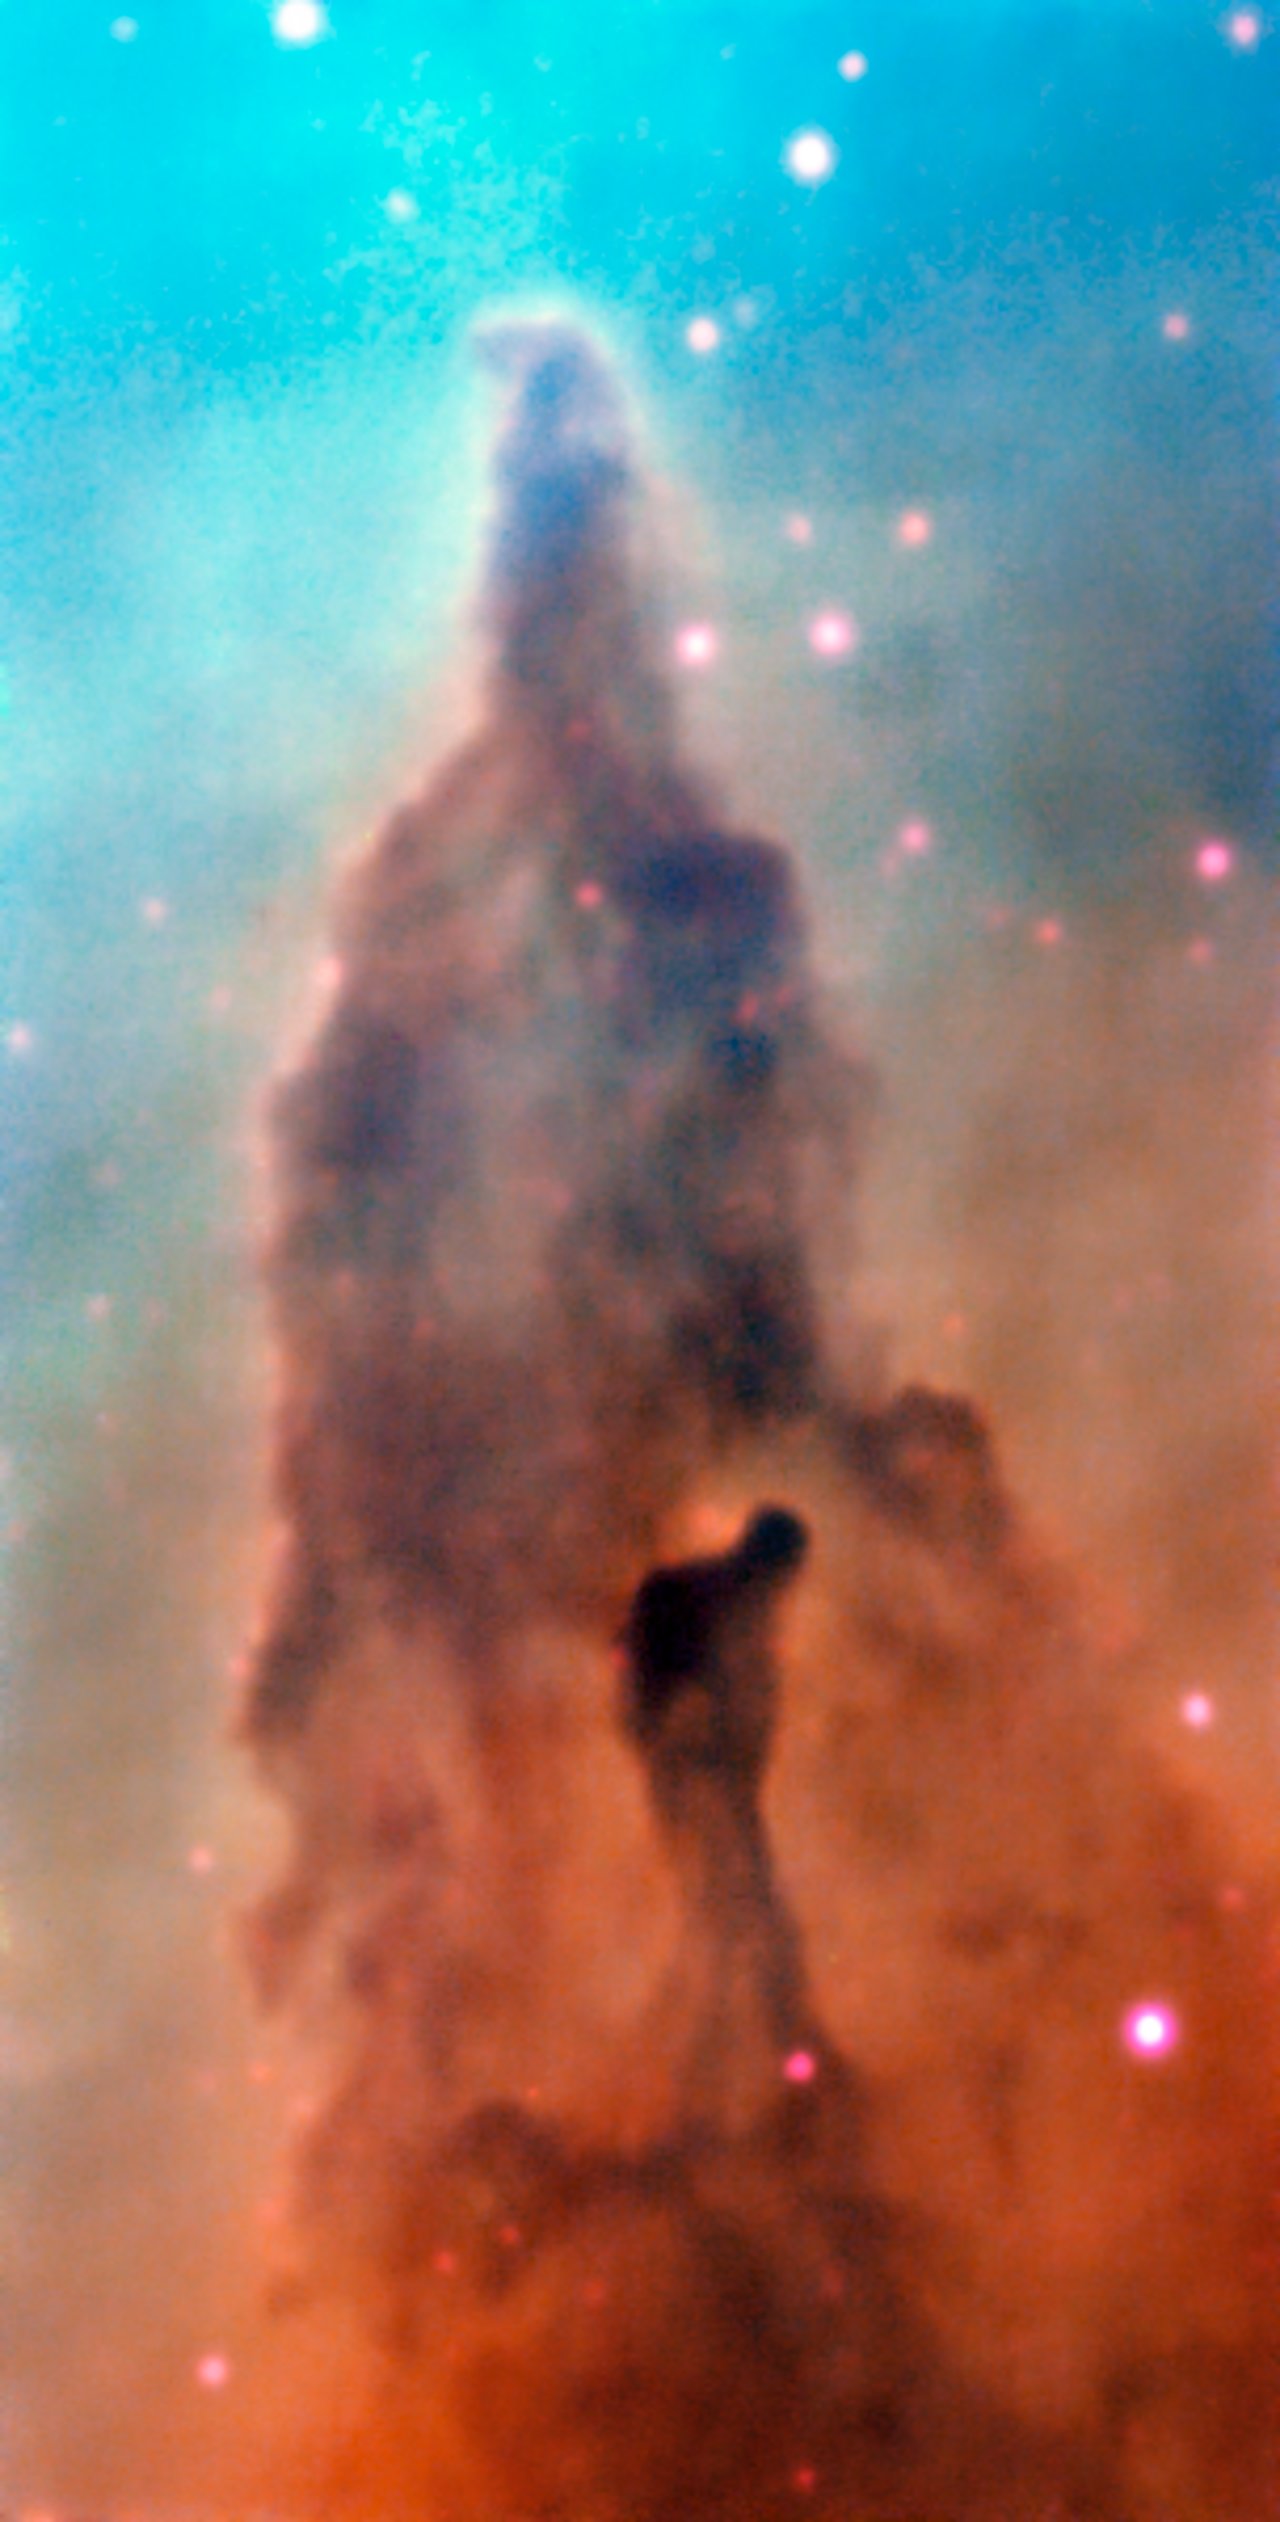 Glorious New Images Take Us On A Trip Through The Iconic Carina Nebula